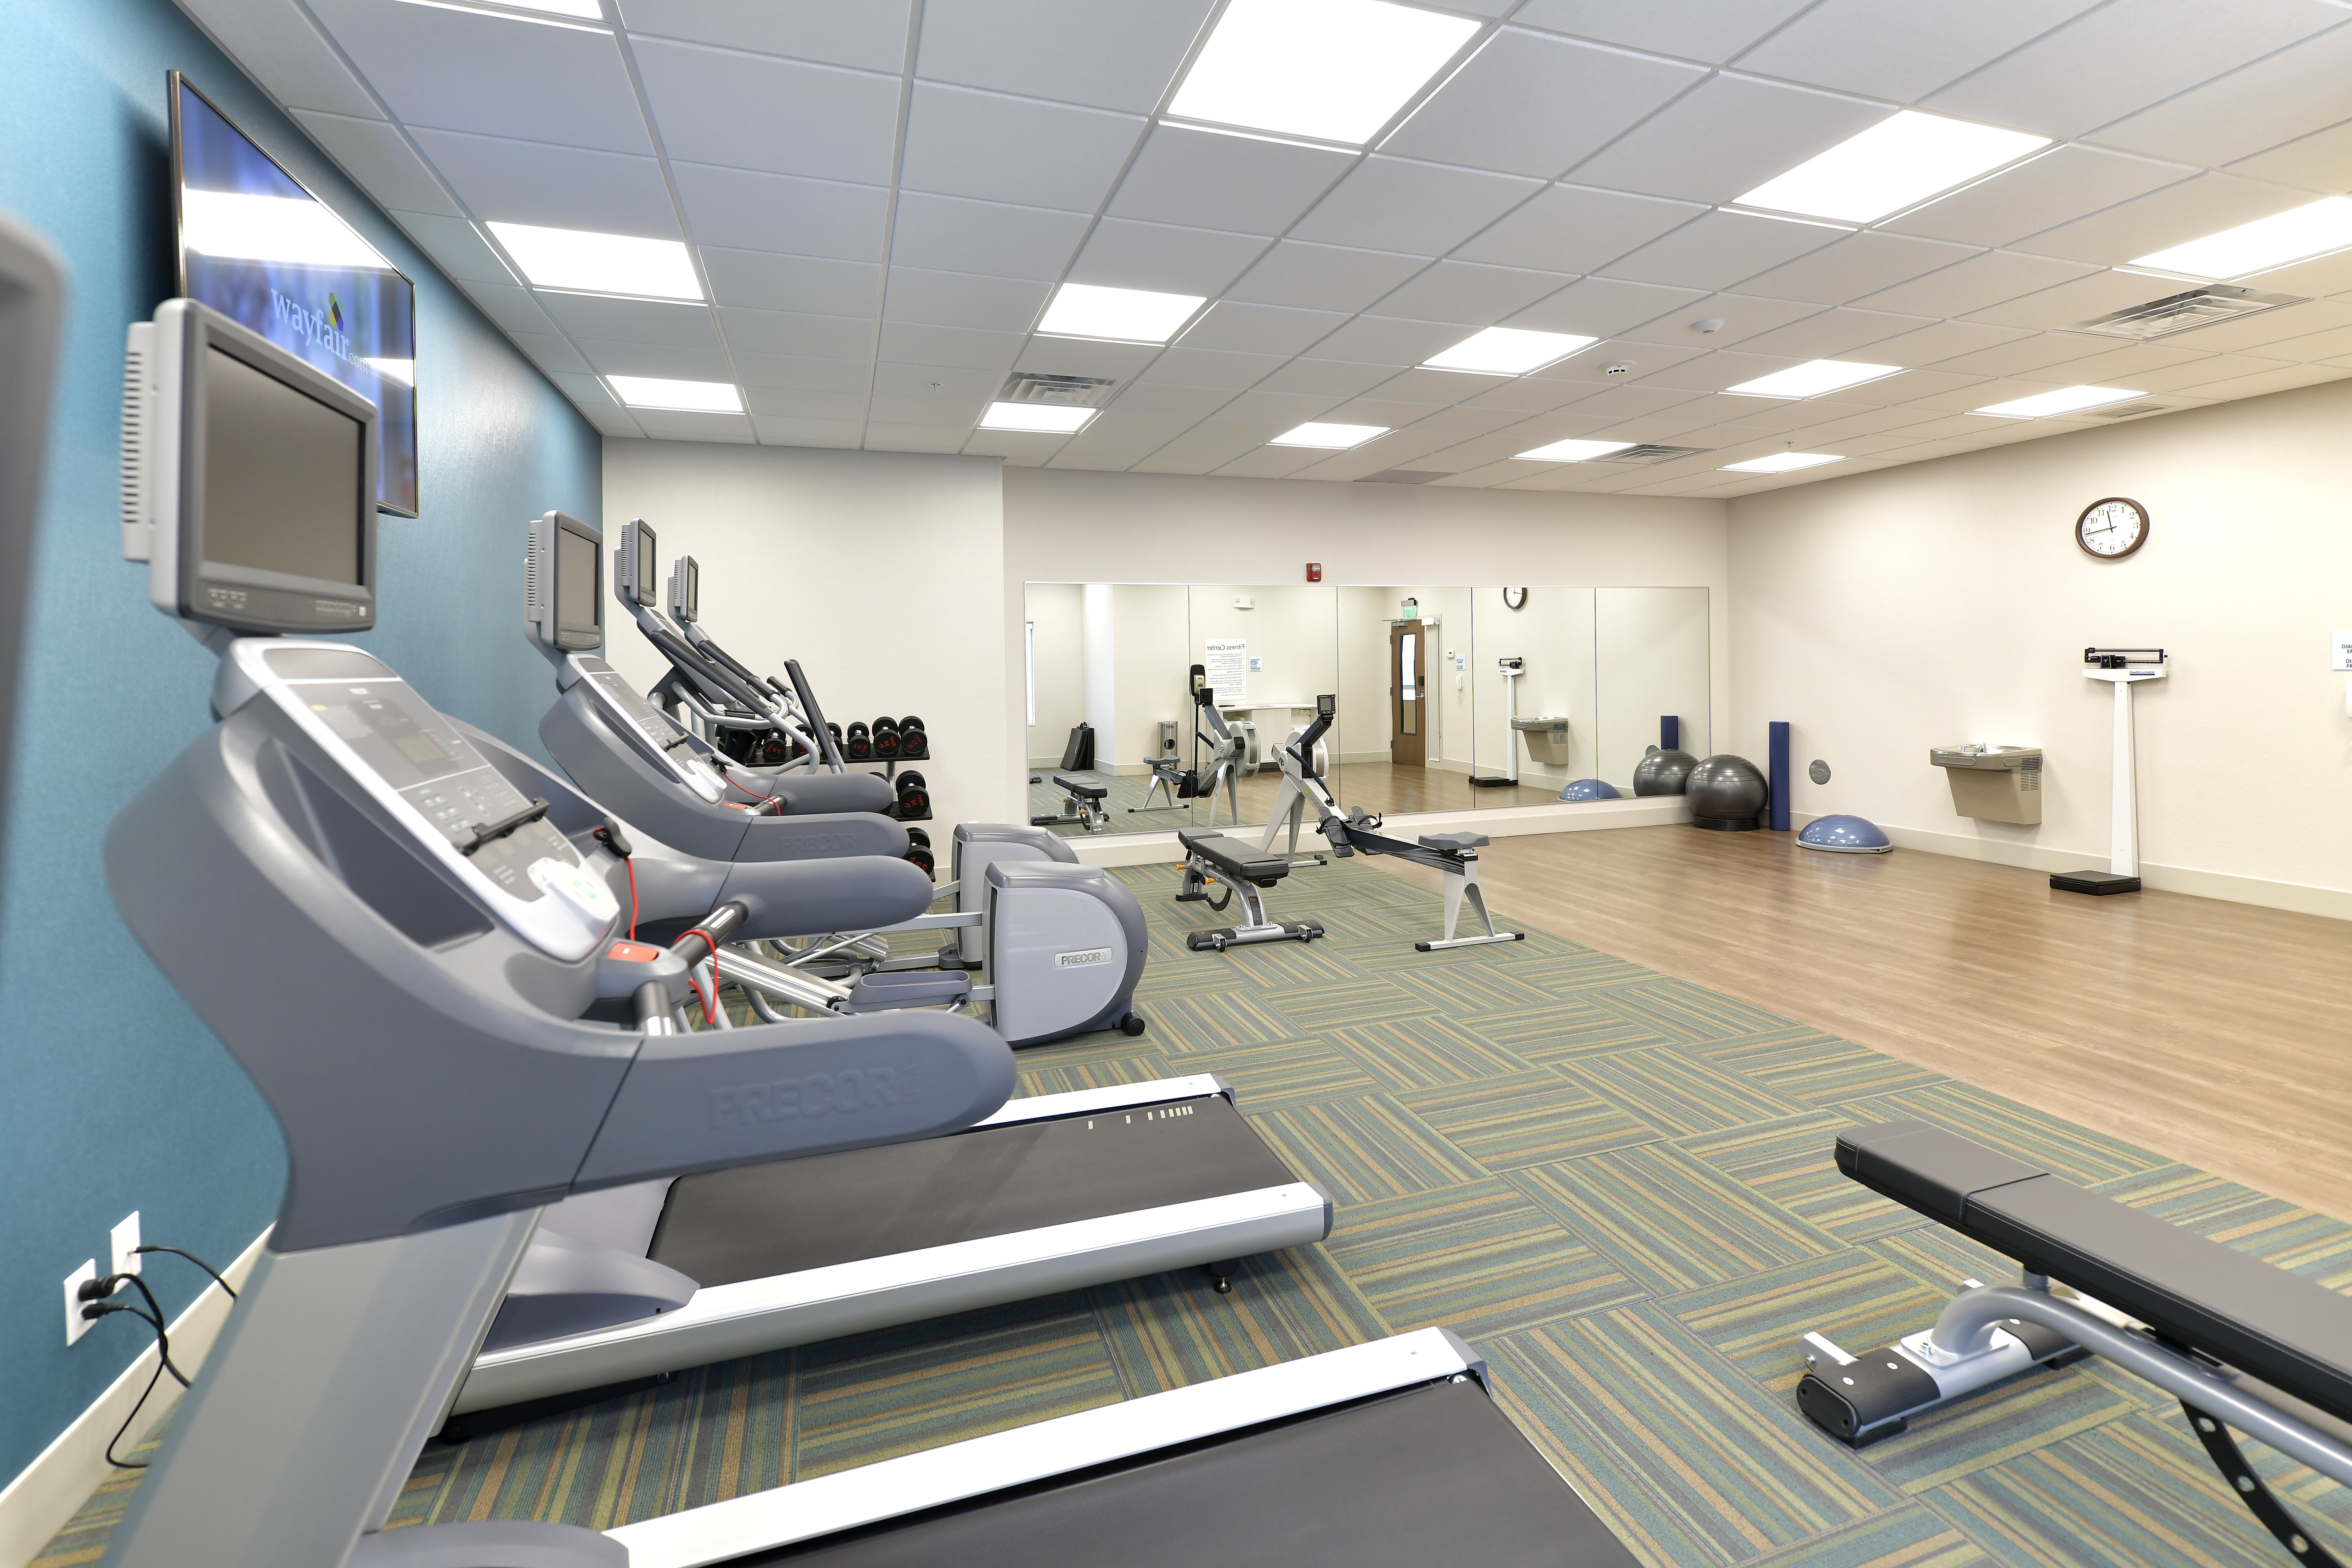 Fitness Room With Elliptical, Treadmill, Bike And Free Weights